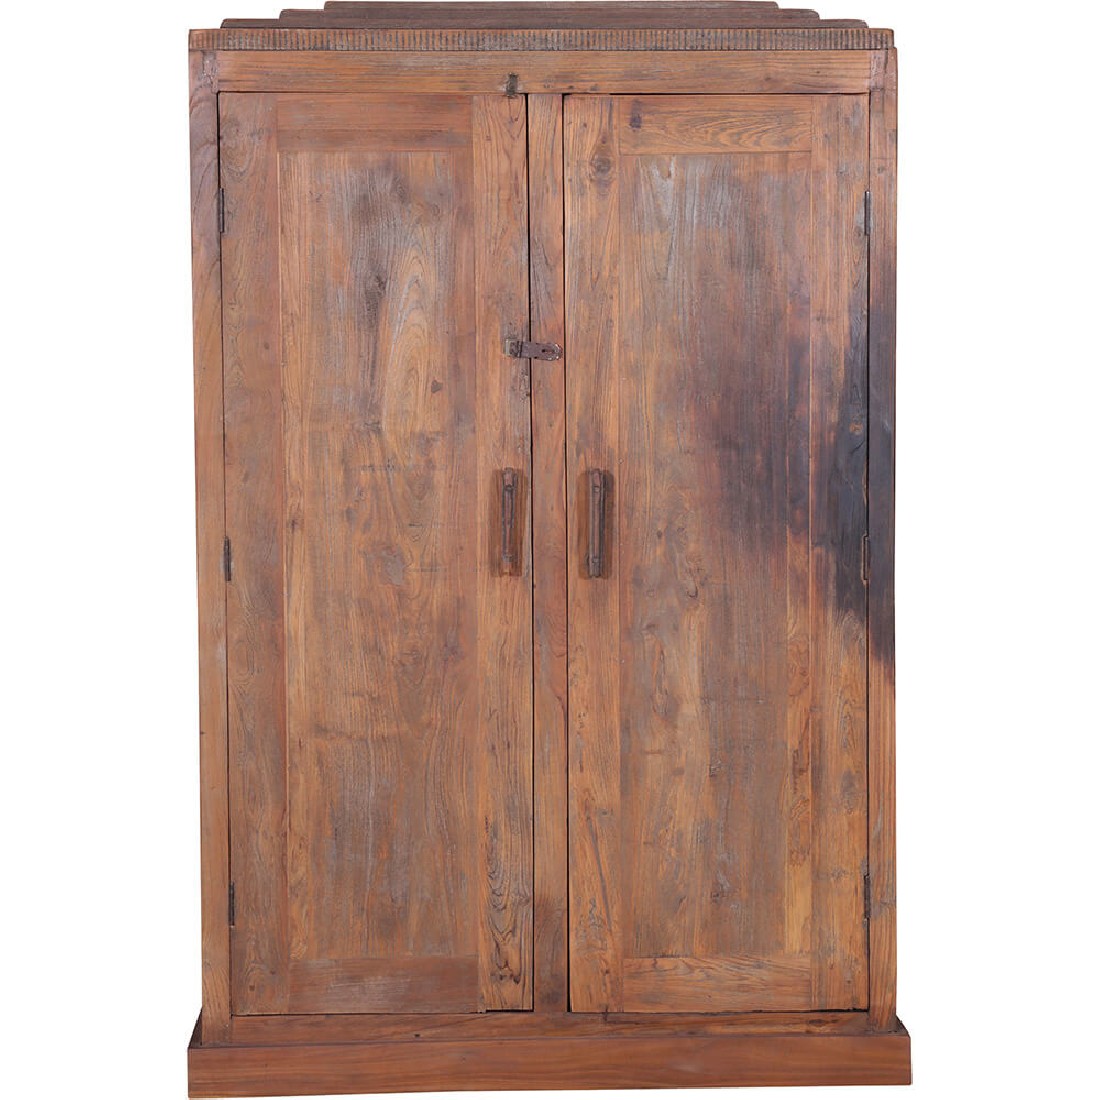 Trademark Rustic Wooden Cabinet3dhaus.gr